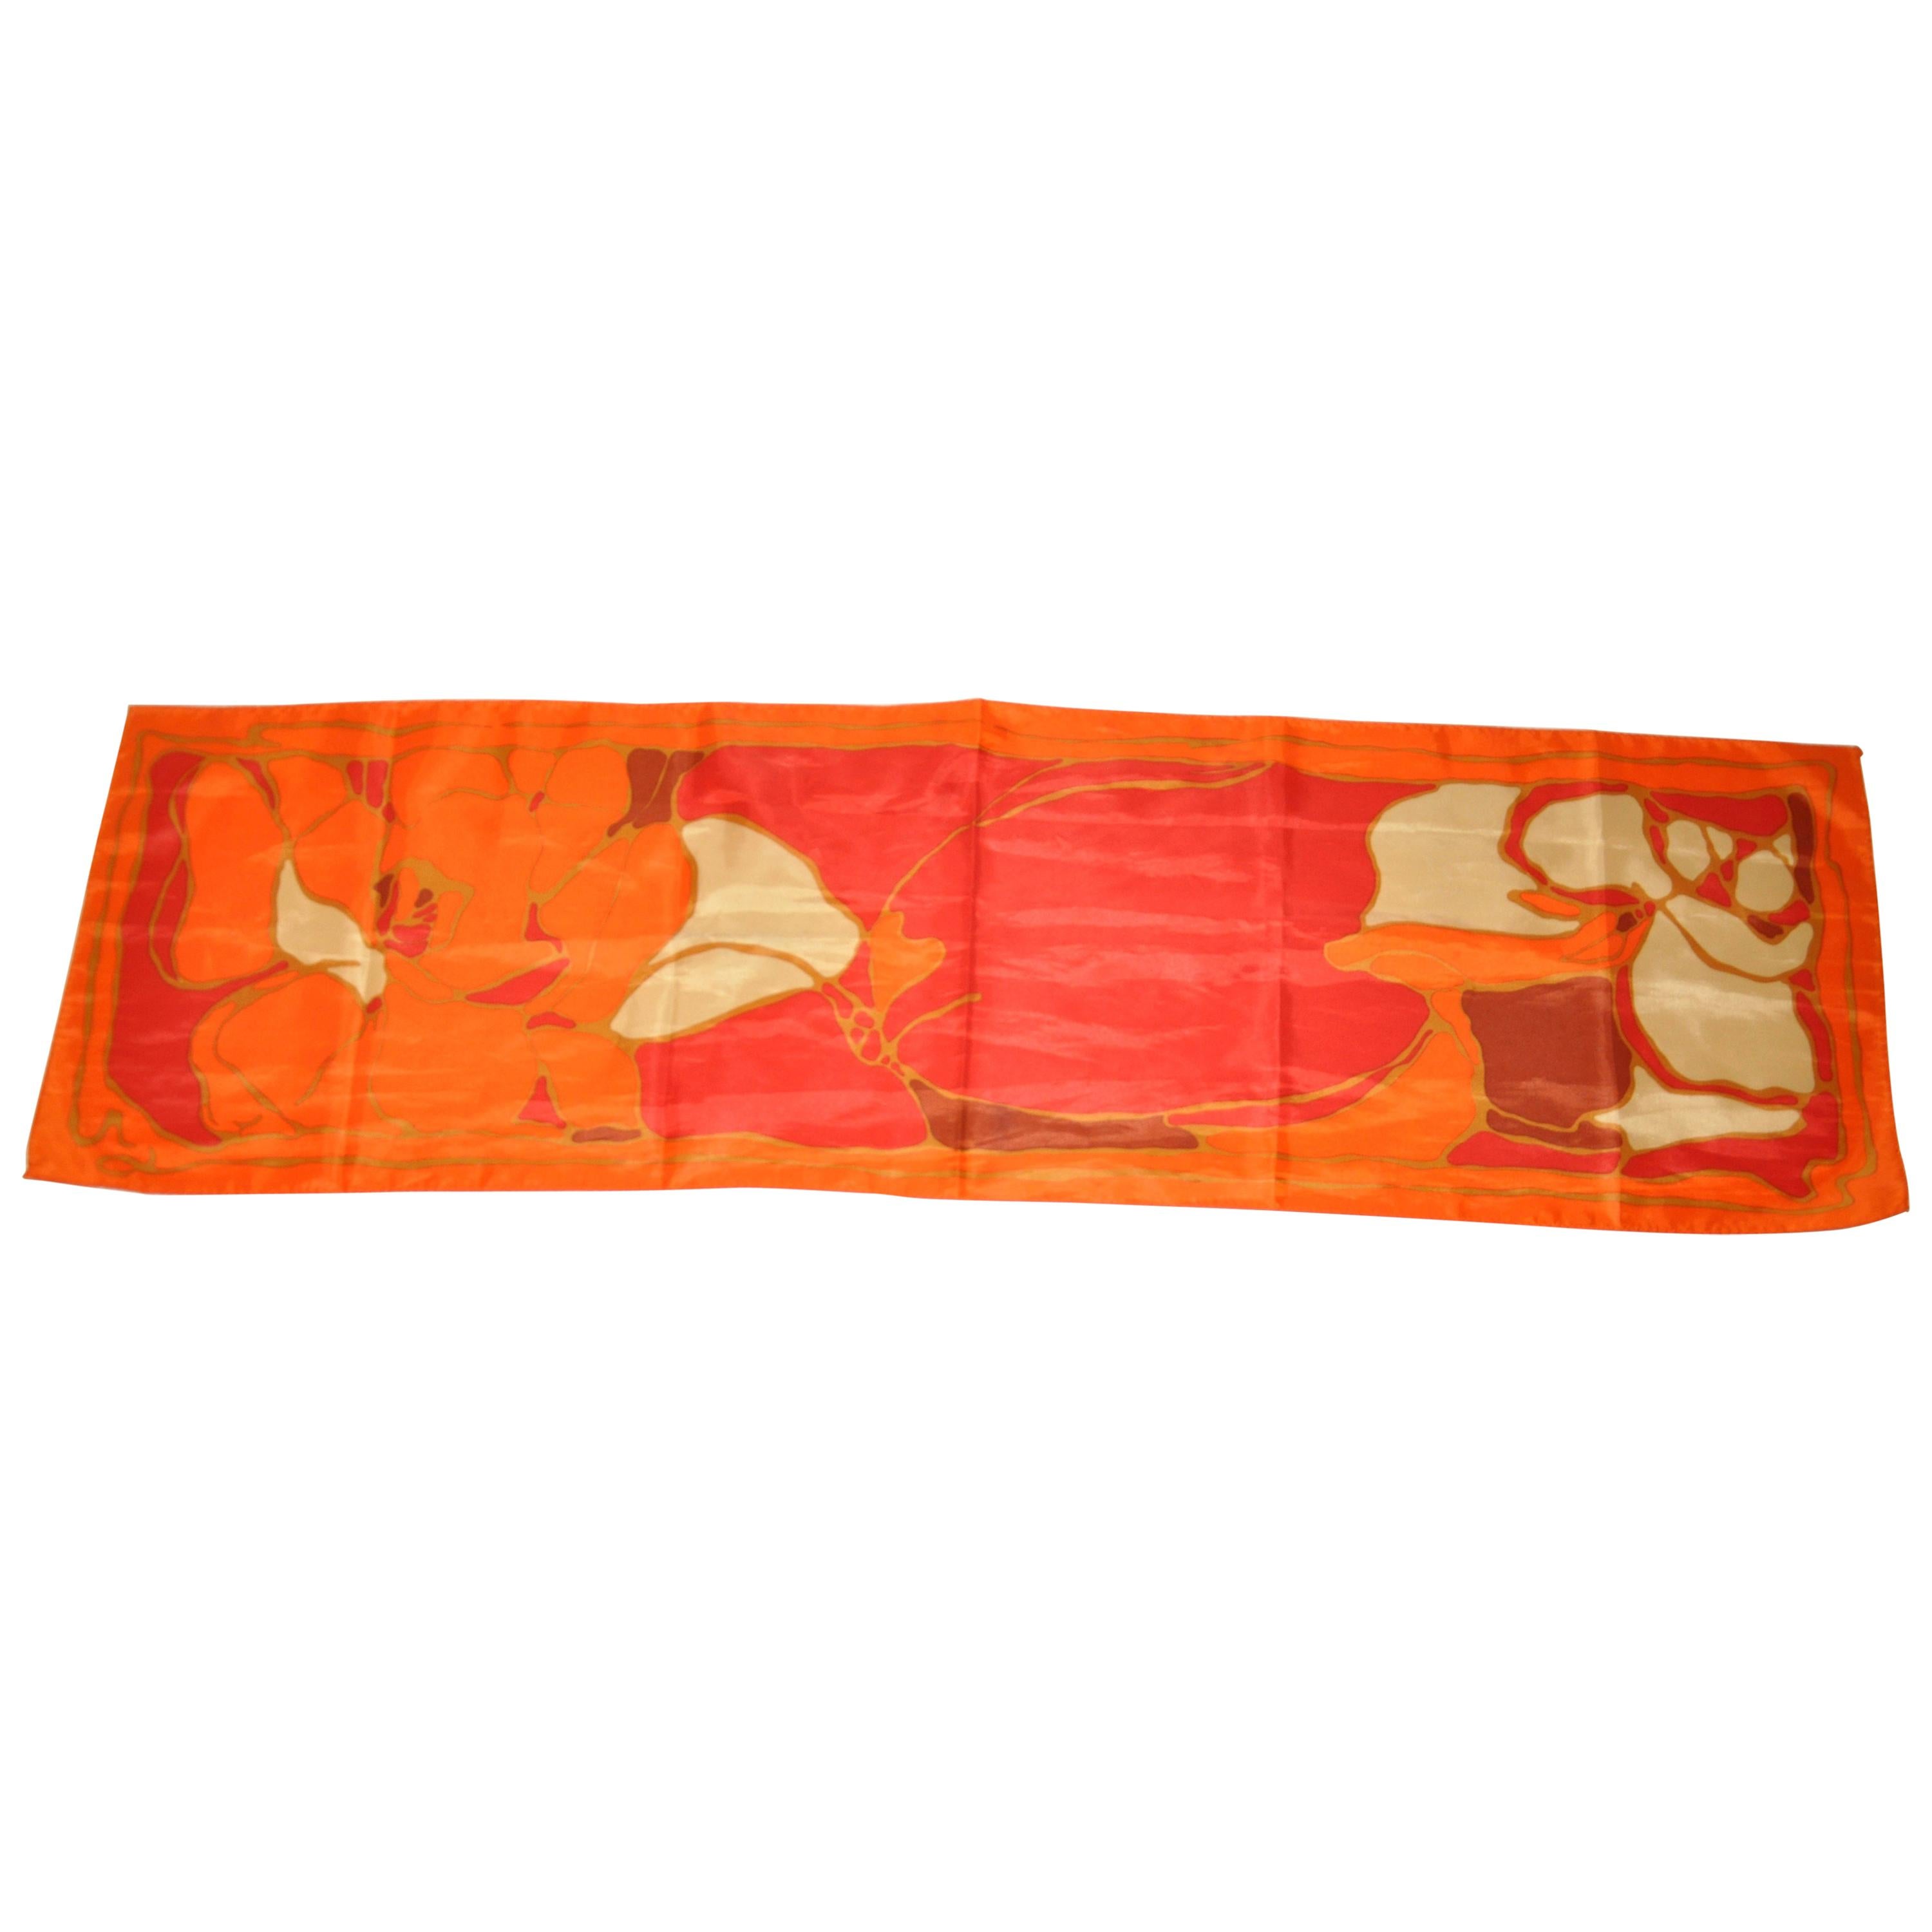 Warm Vivid Tangerines, Reds, and Creams Floral Acetate Scarf For Sale